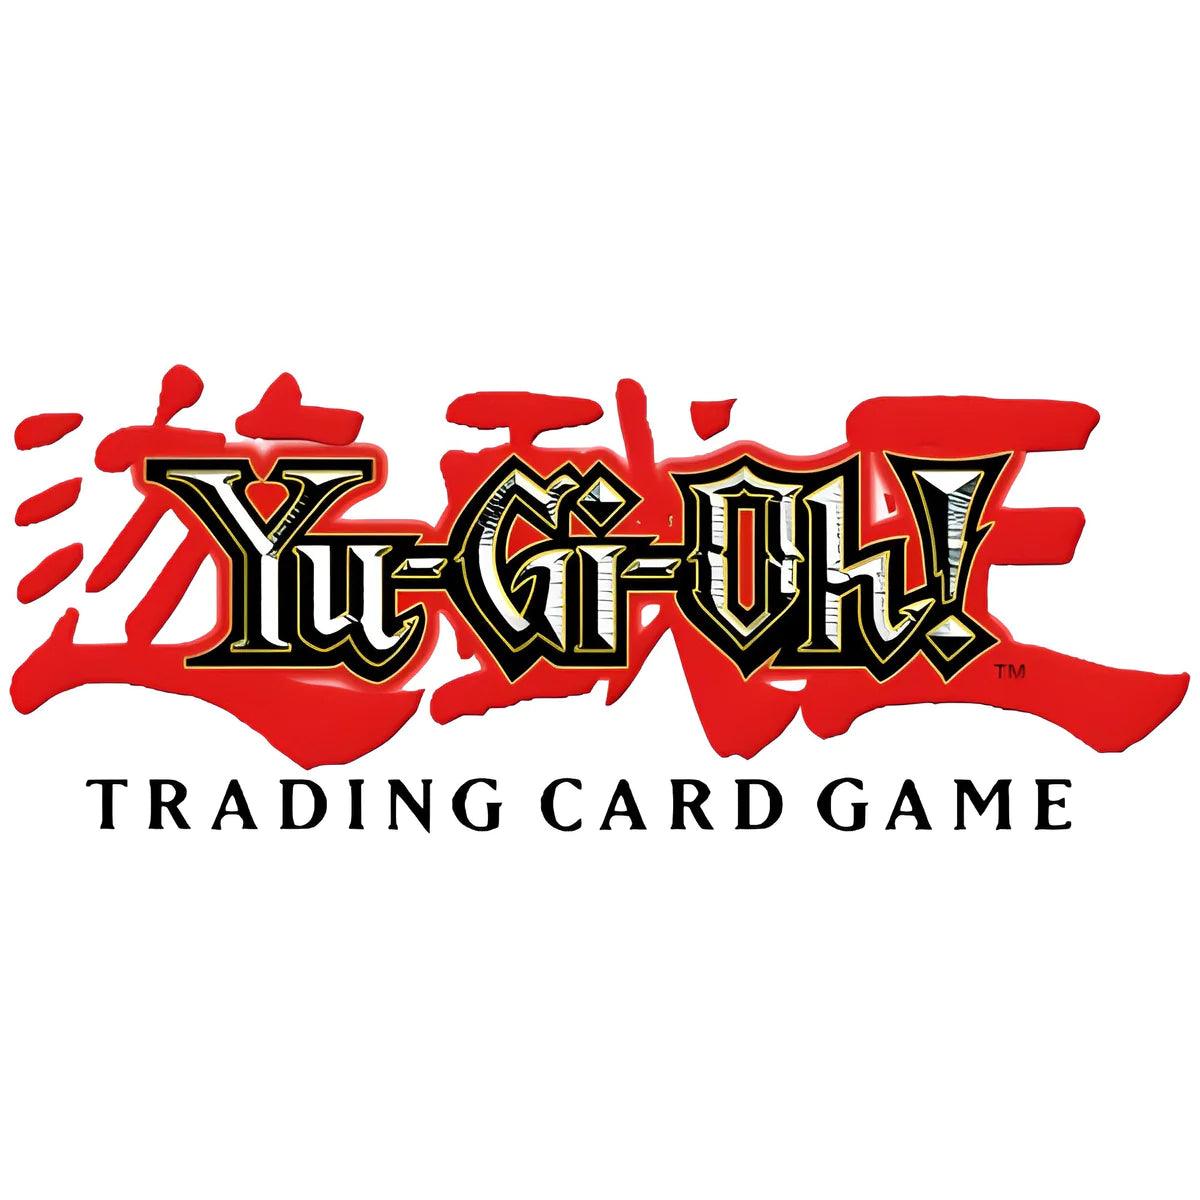 Card Sleeves Pack - Yu-Gi-Oh! Tournament Legal Sleeves (50 sleeves/pack) - Hobby Champion Inc